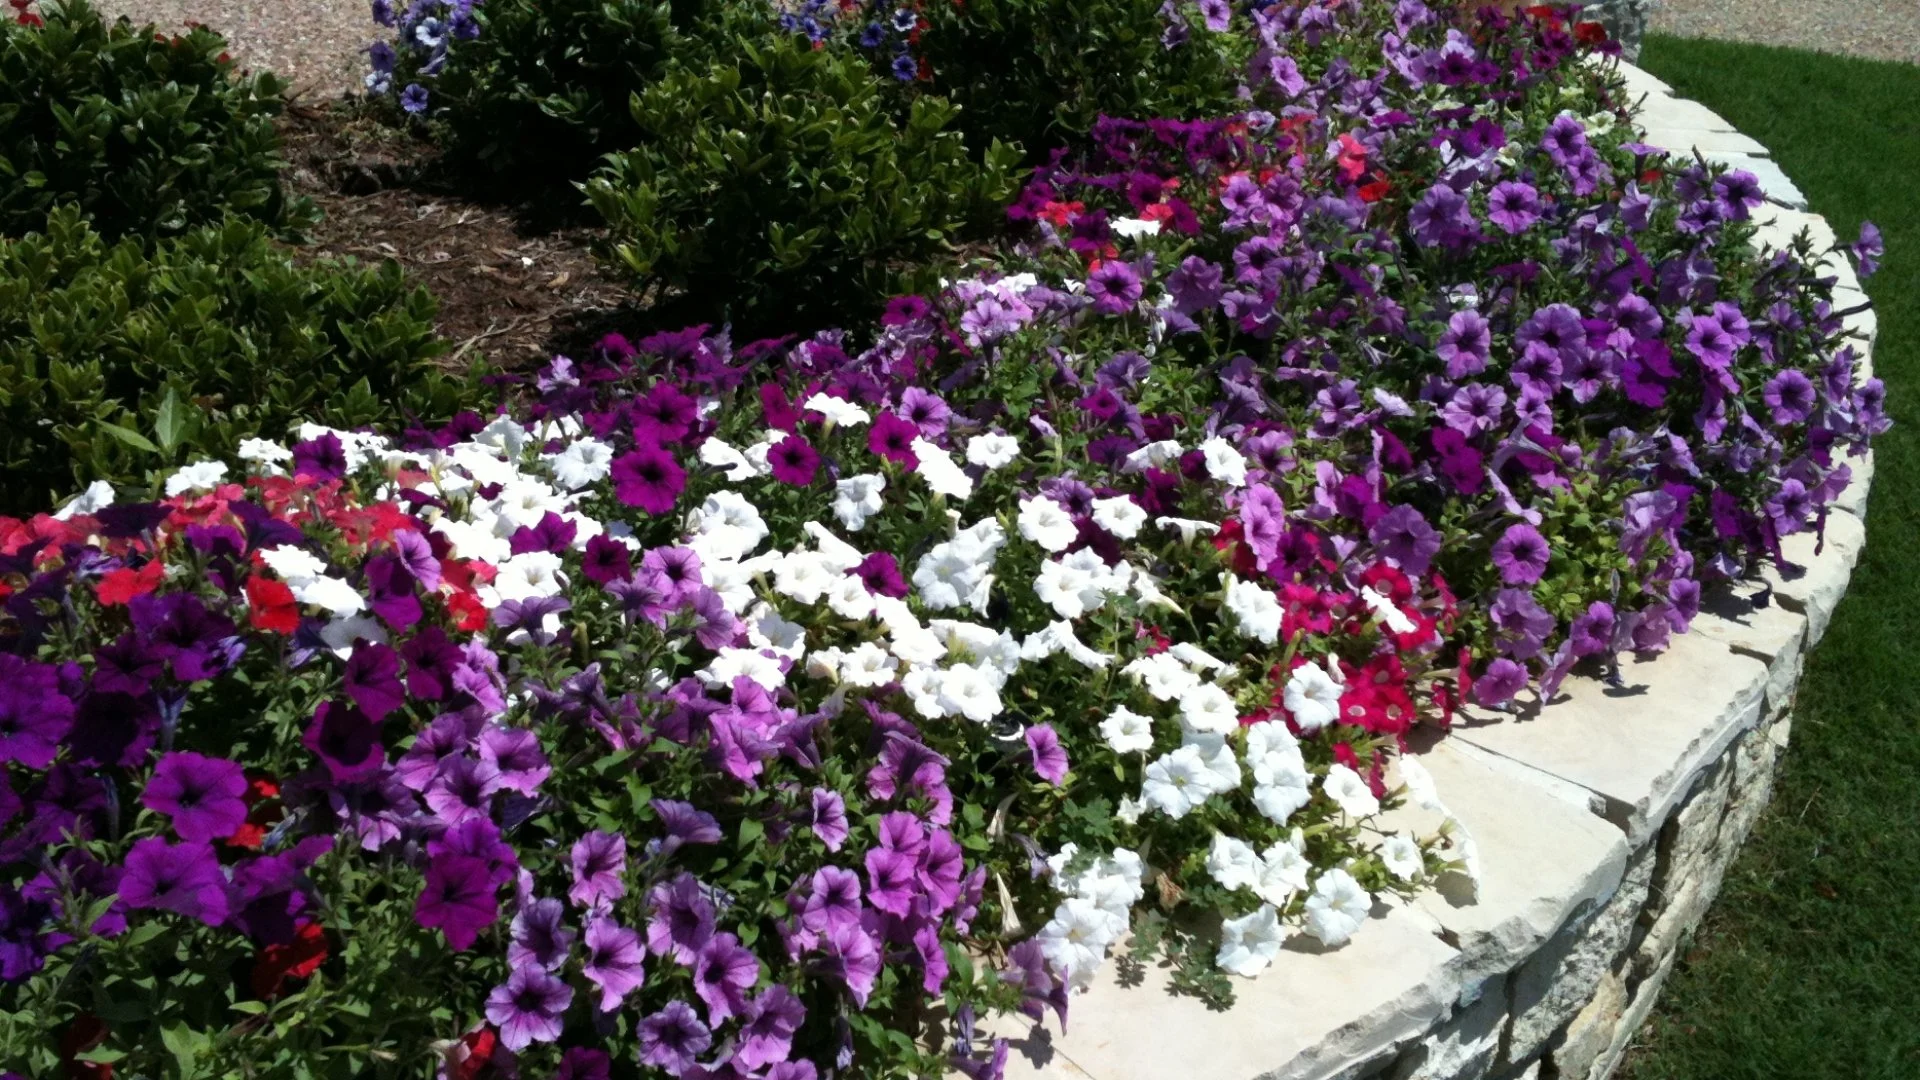 Factors to Consider When Adding Fall Annual Flowers to Your Landscape Beds